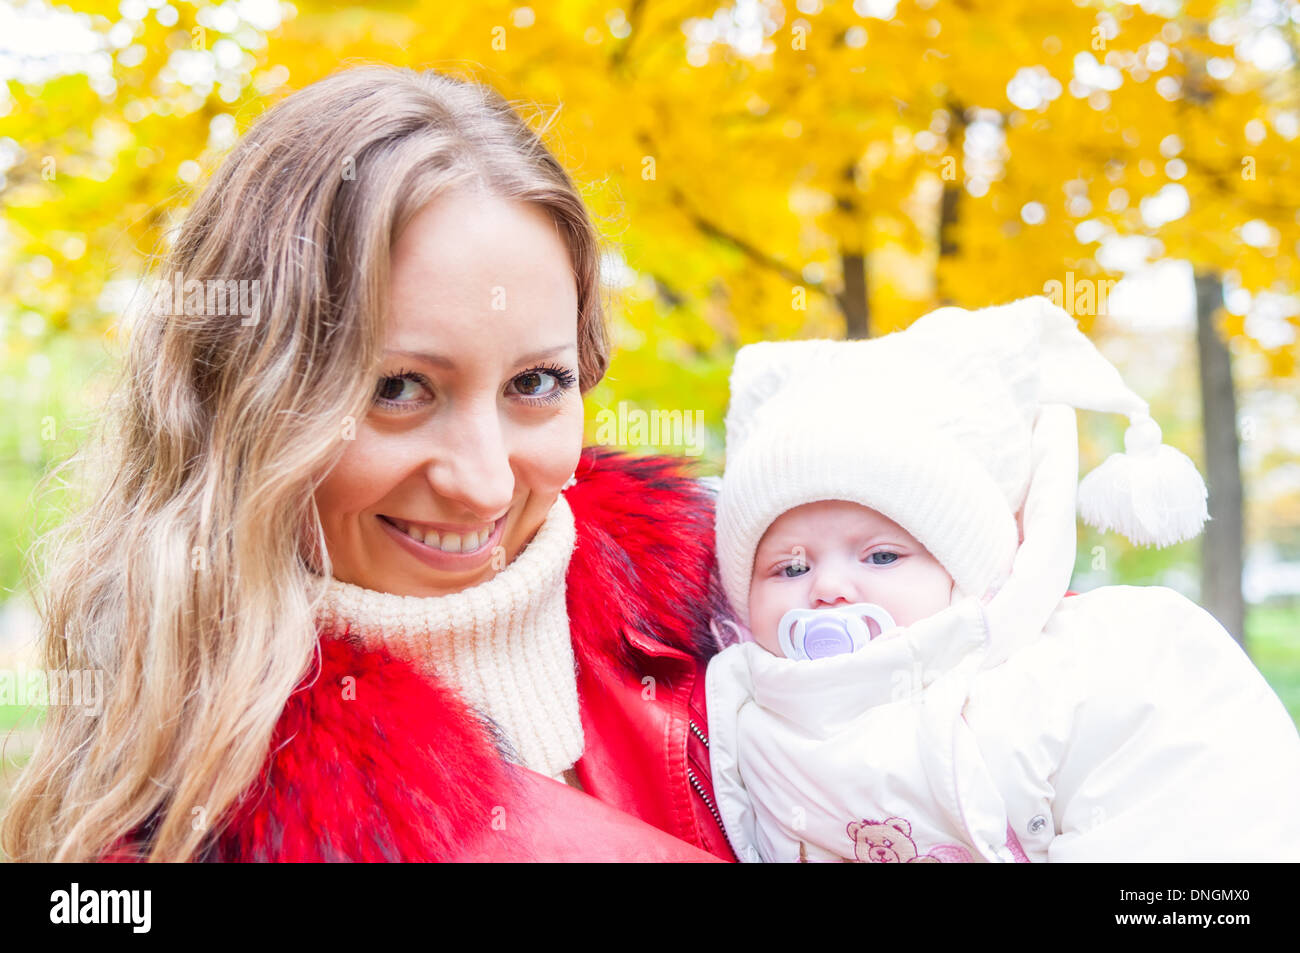 Happy mother and baby girl in autumn park Banque D'Images